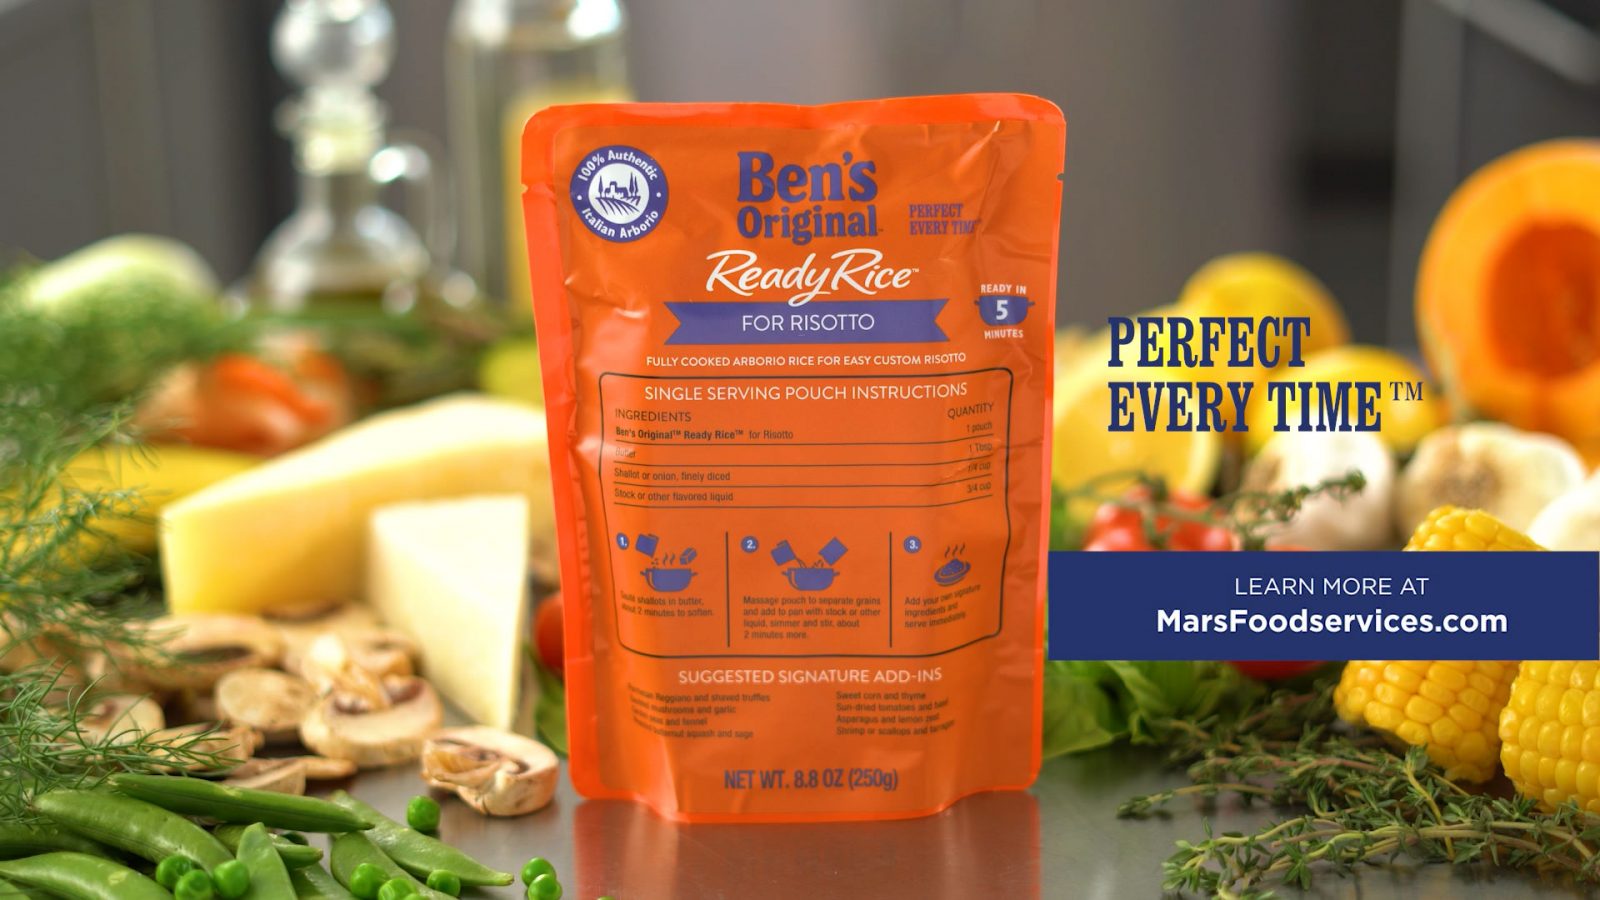 Introducing Ben's Original Ready Rice for Risotto